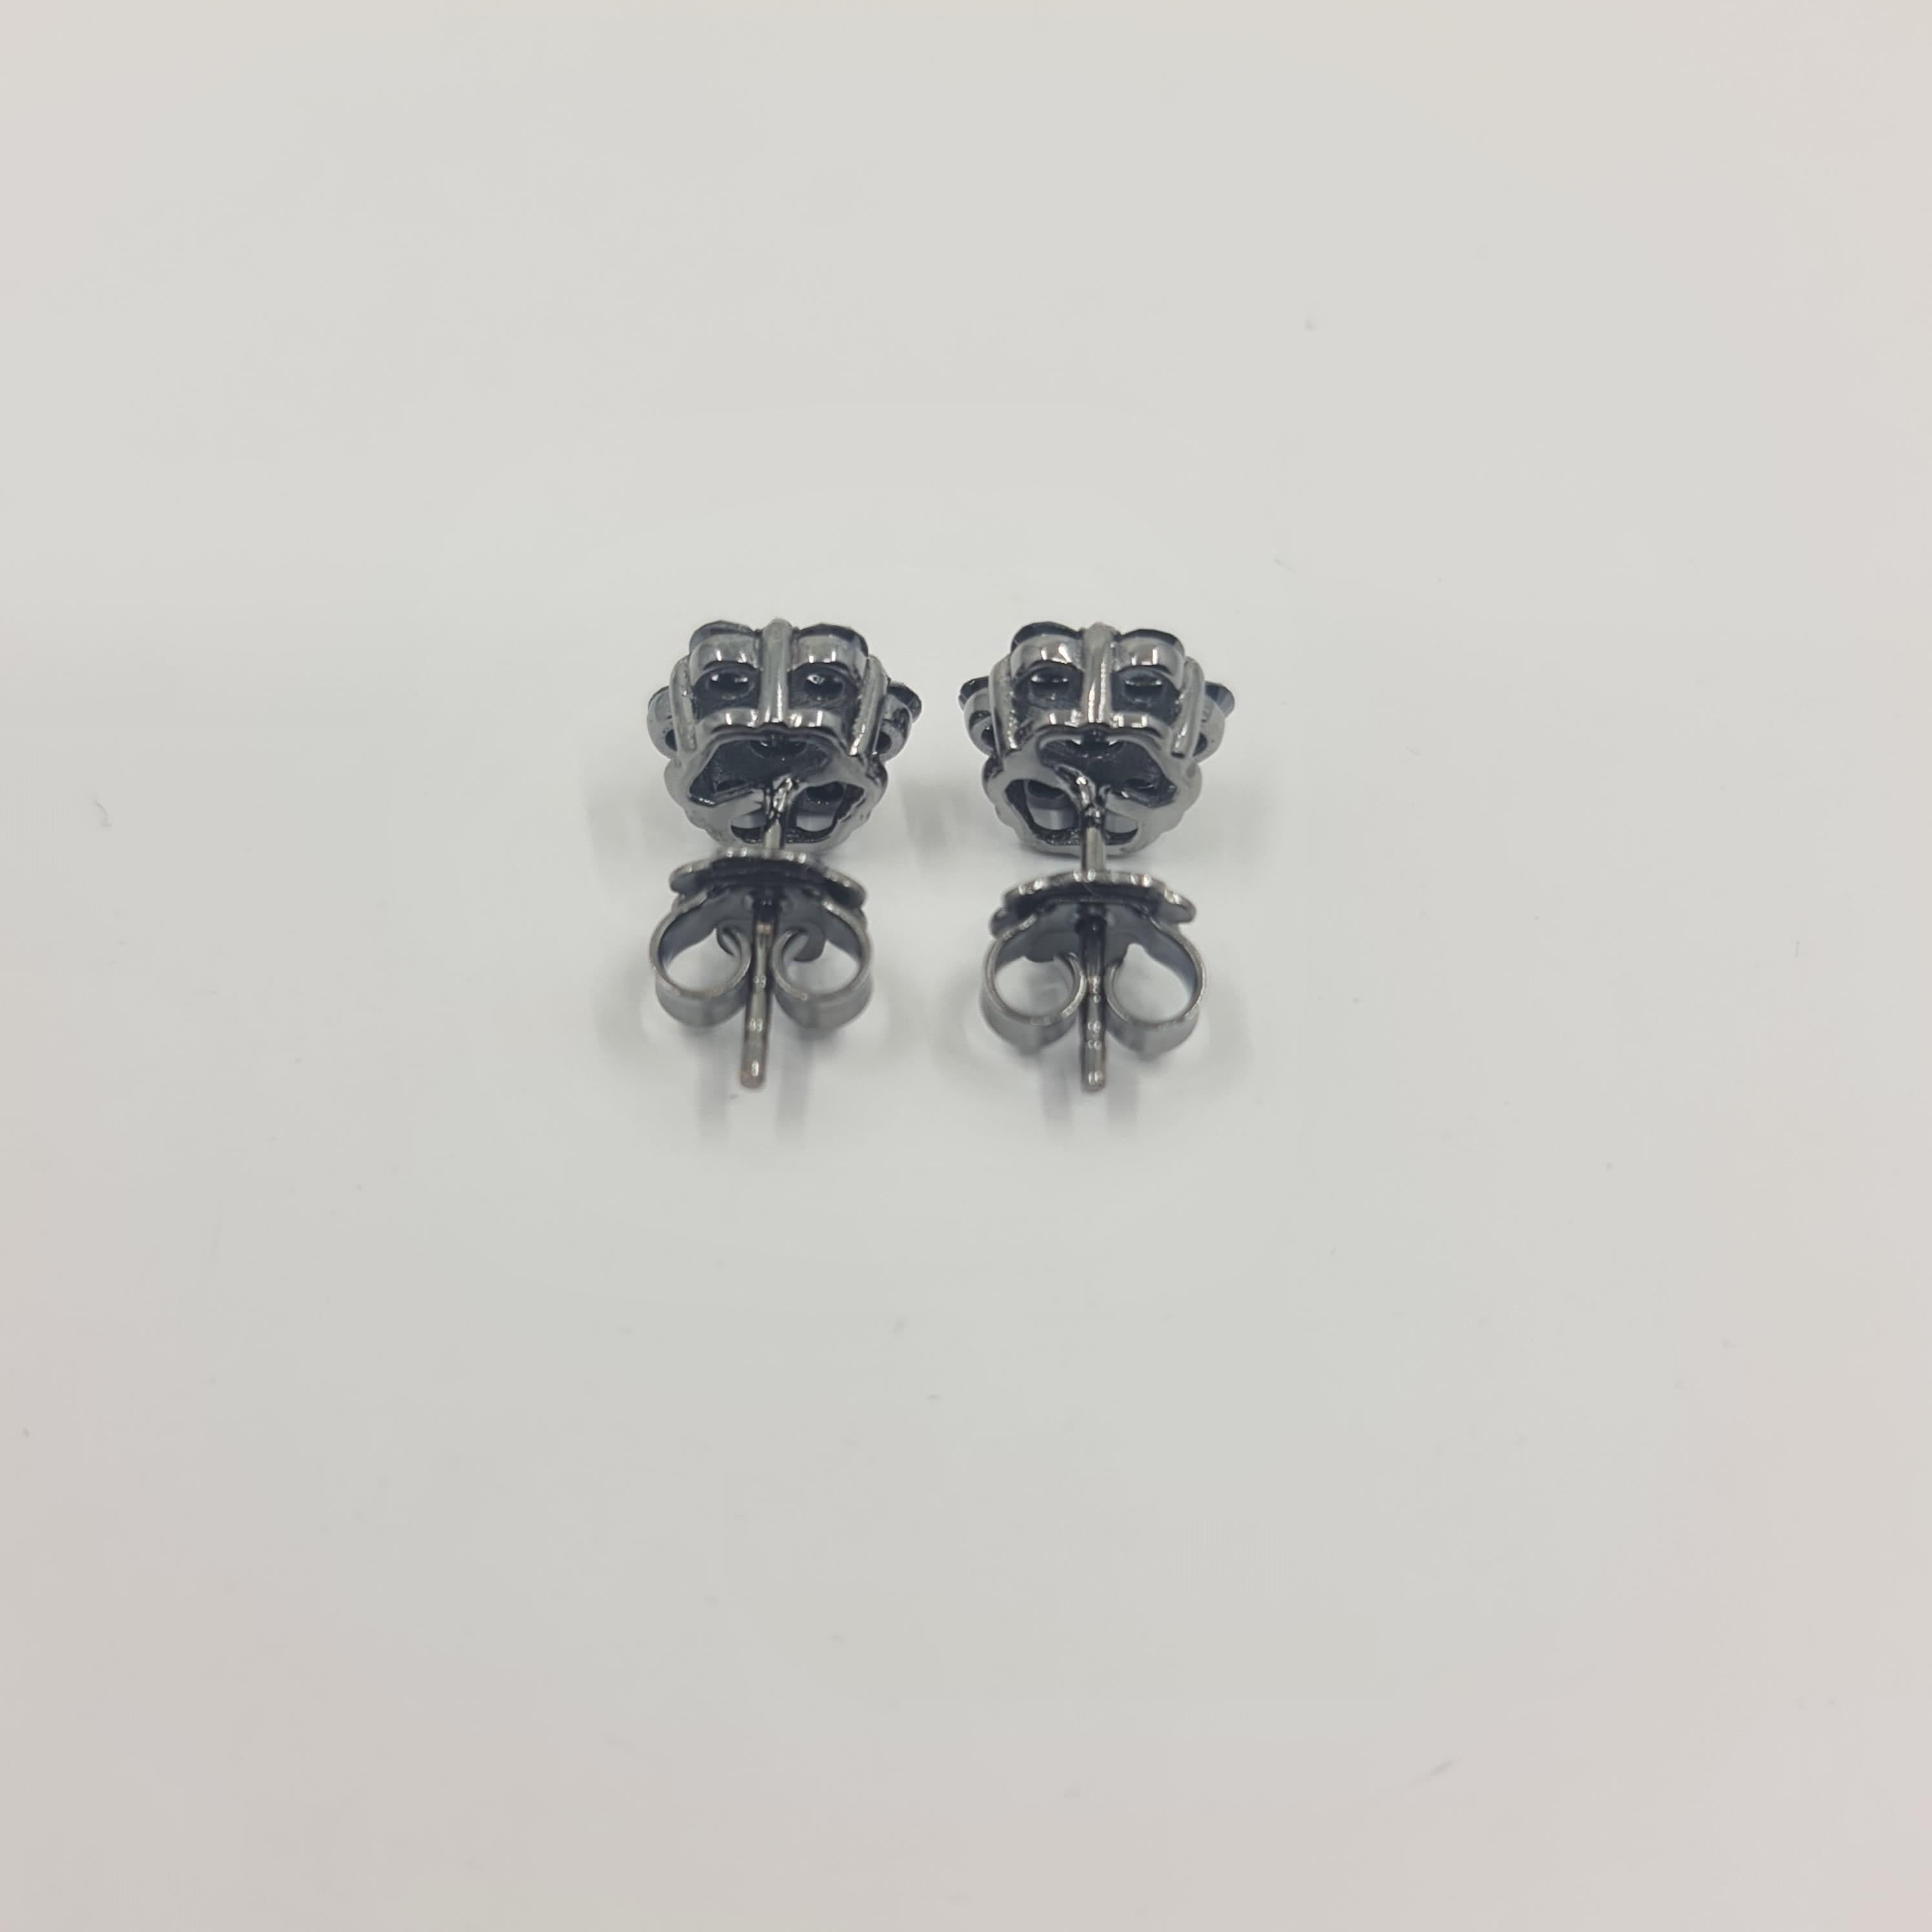 Exquisite Black Diamond Earrings 1.11 Carat in 18K Black Gold Round Cut For Sale 1